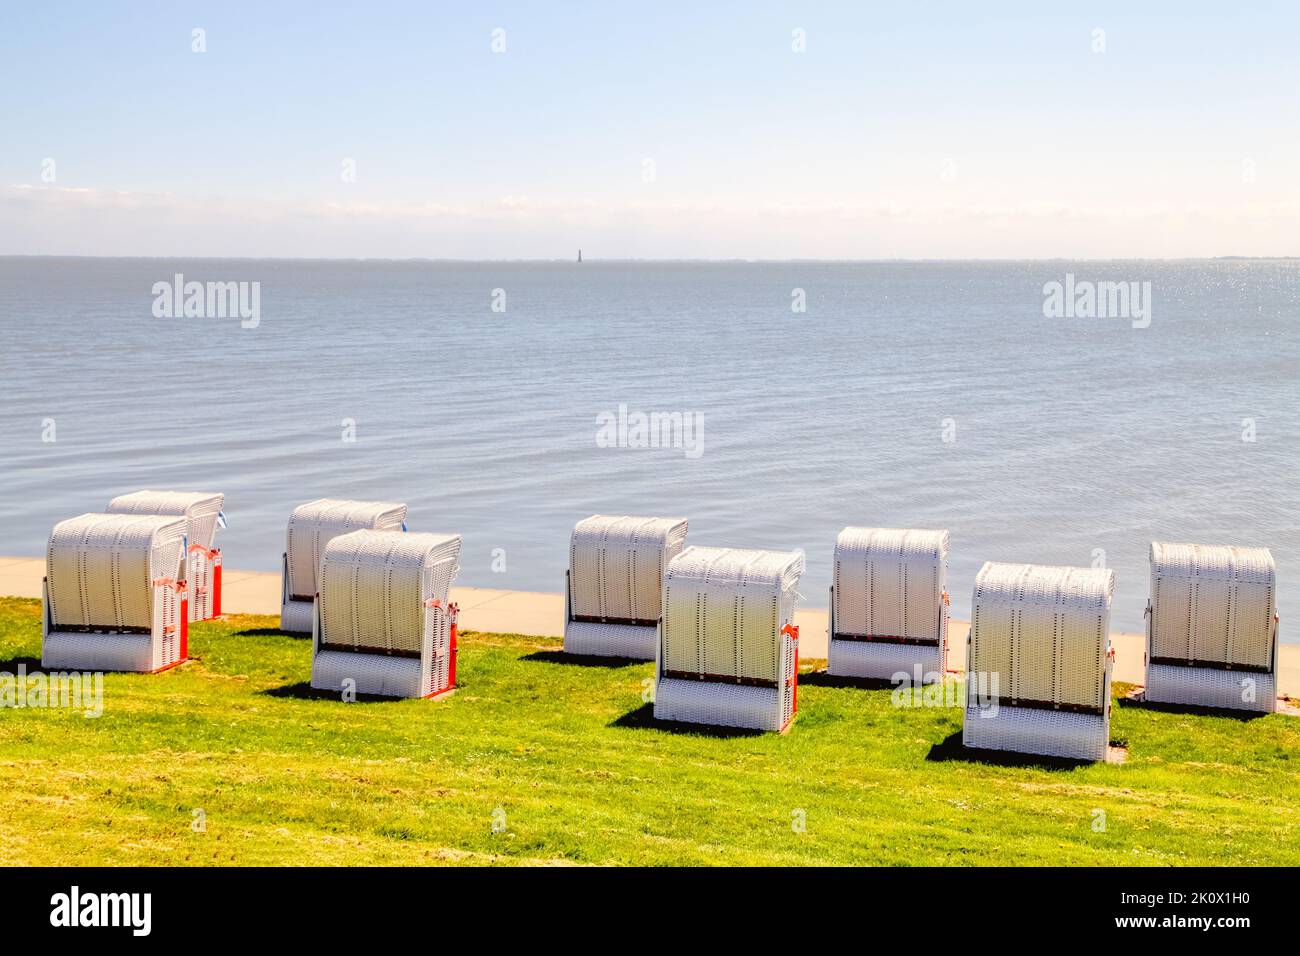 Beach chairs, Promenade at South Beach in Wilhelmshaven, Germany Stock Photo